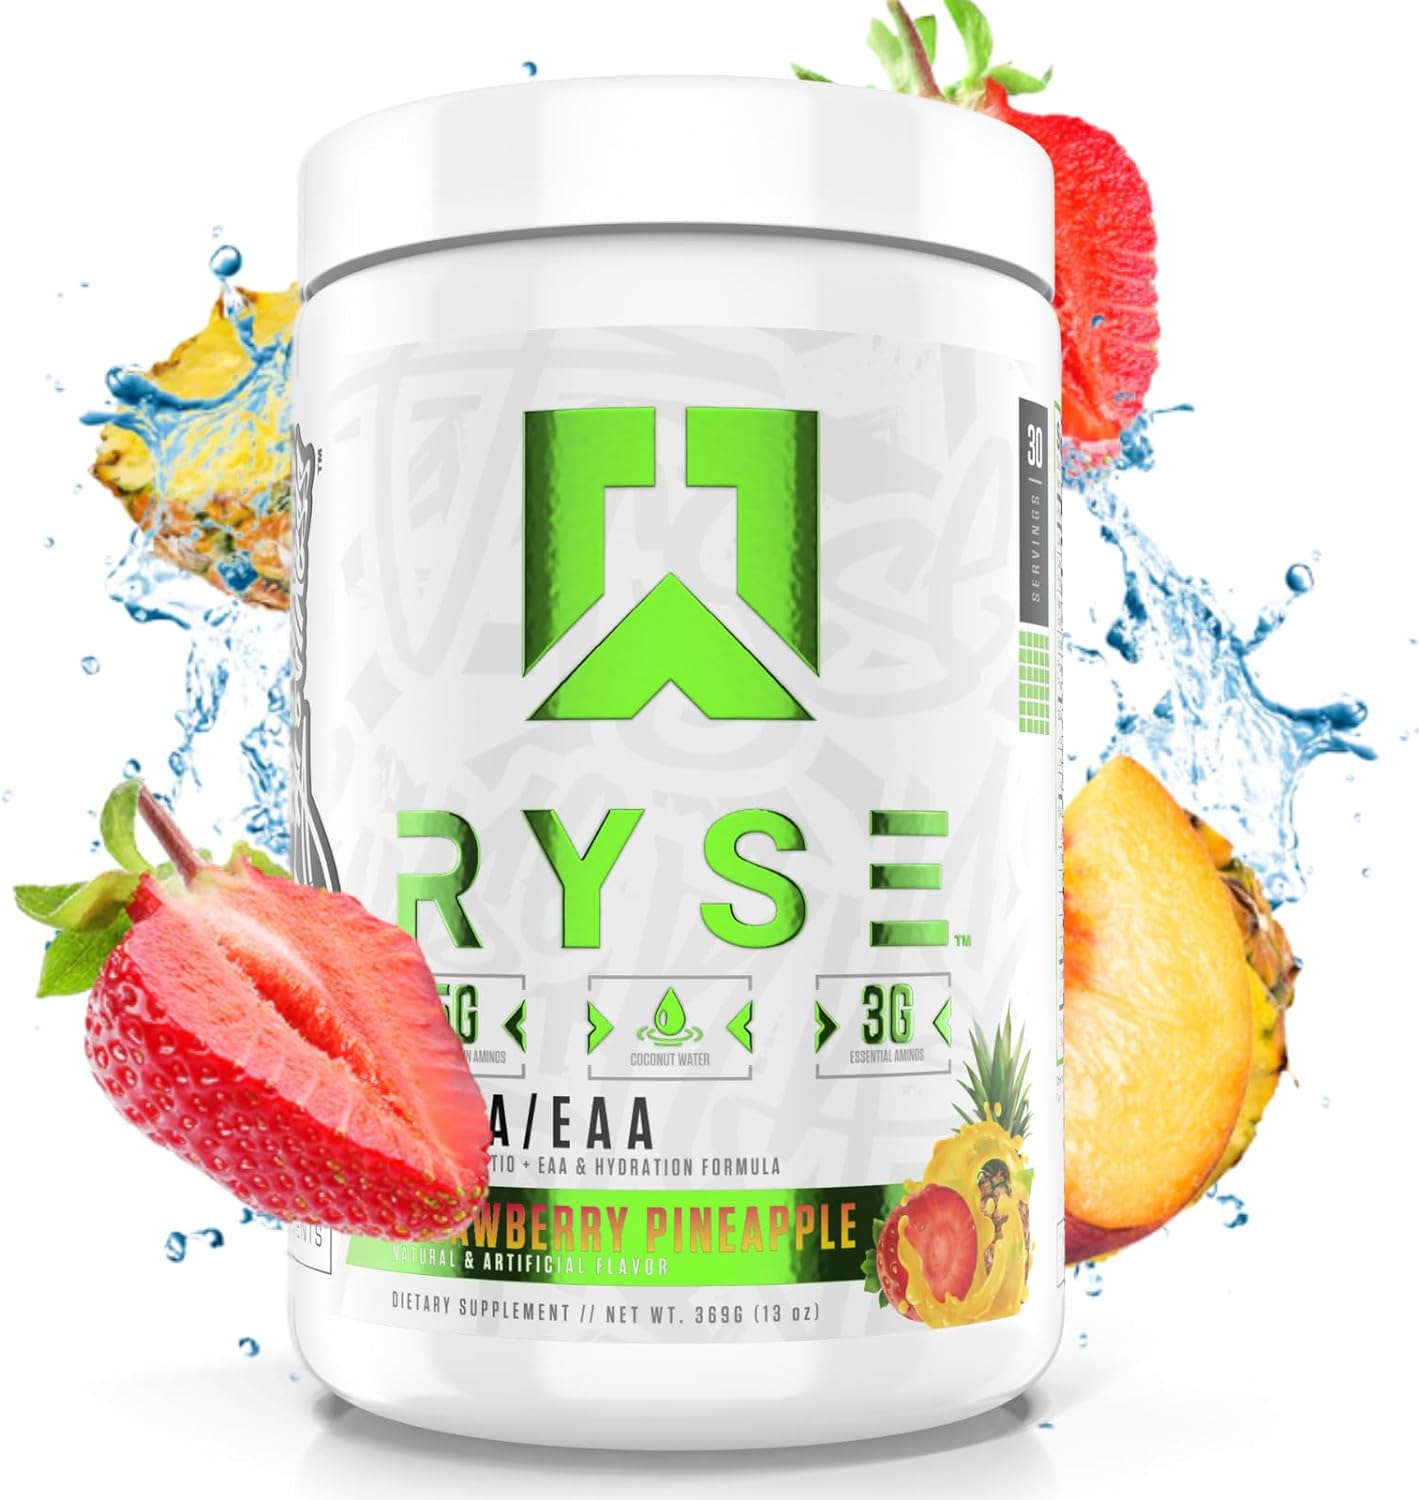 RYSE Up Supplements Core Series BCAA+EAA | Recover, Hydrate, and Build | with 5g Branched Chain Aminos and 3g Essential Aminos | 30 Servings (Strawberry Pineapple)